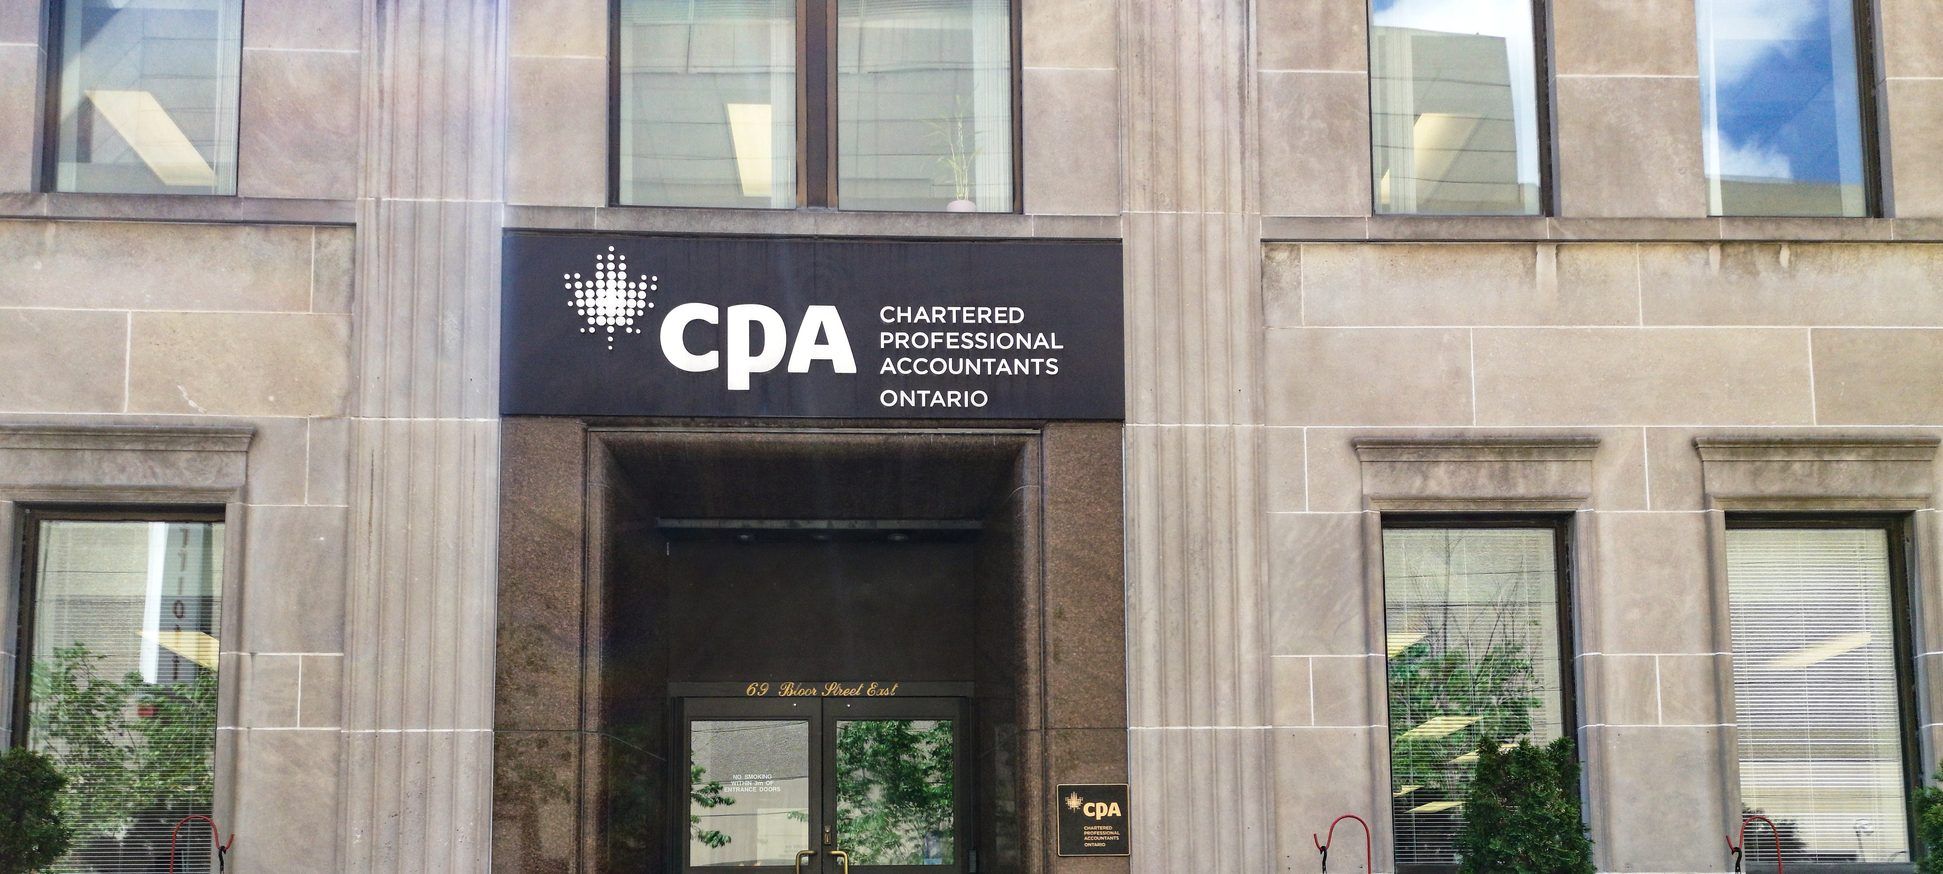 CPA Canada regarding the class action lawsuit filed over the data breach